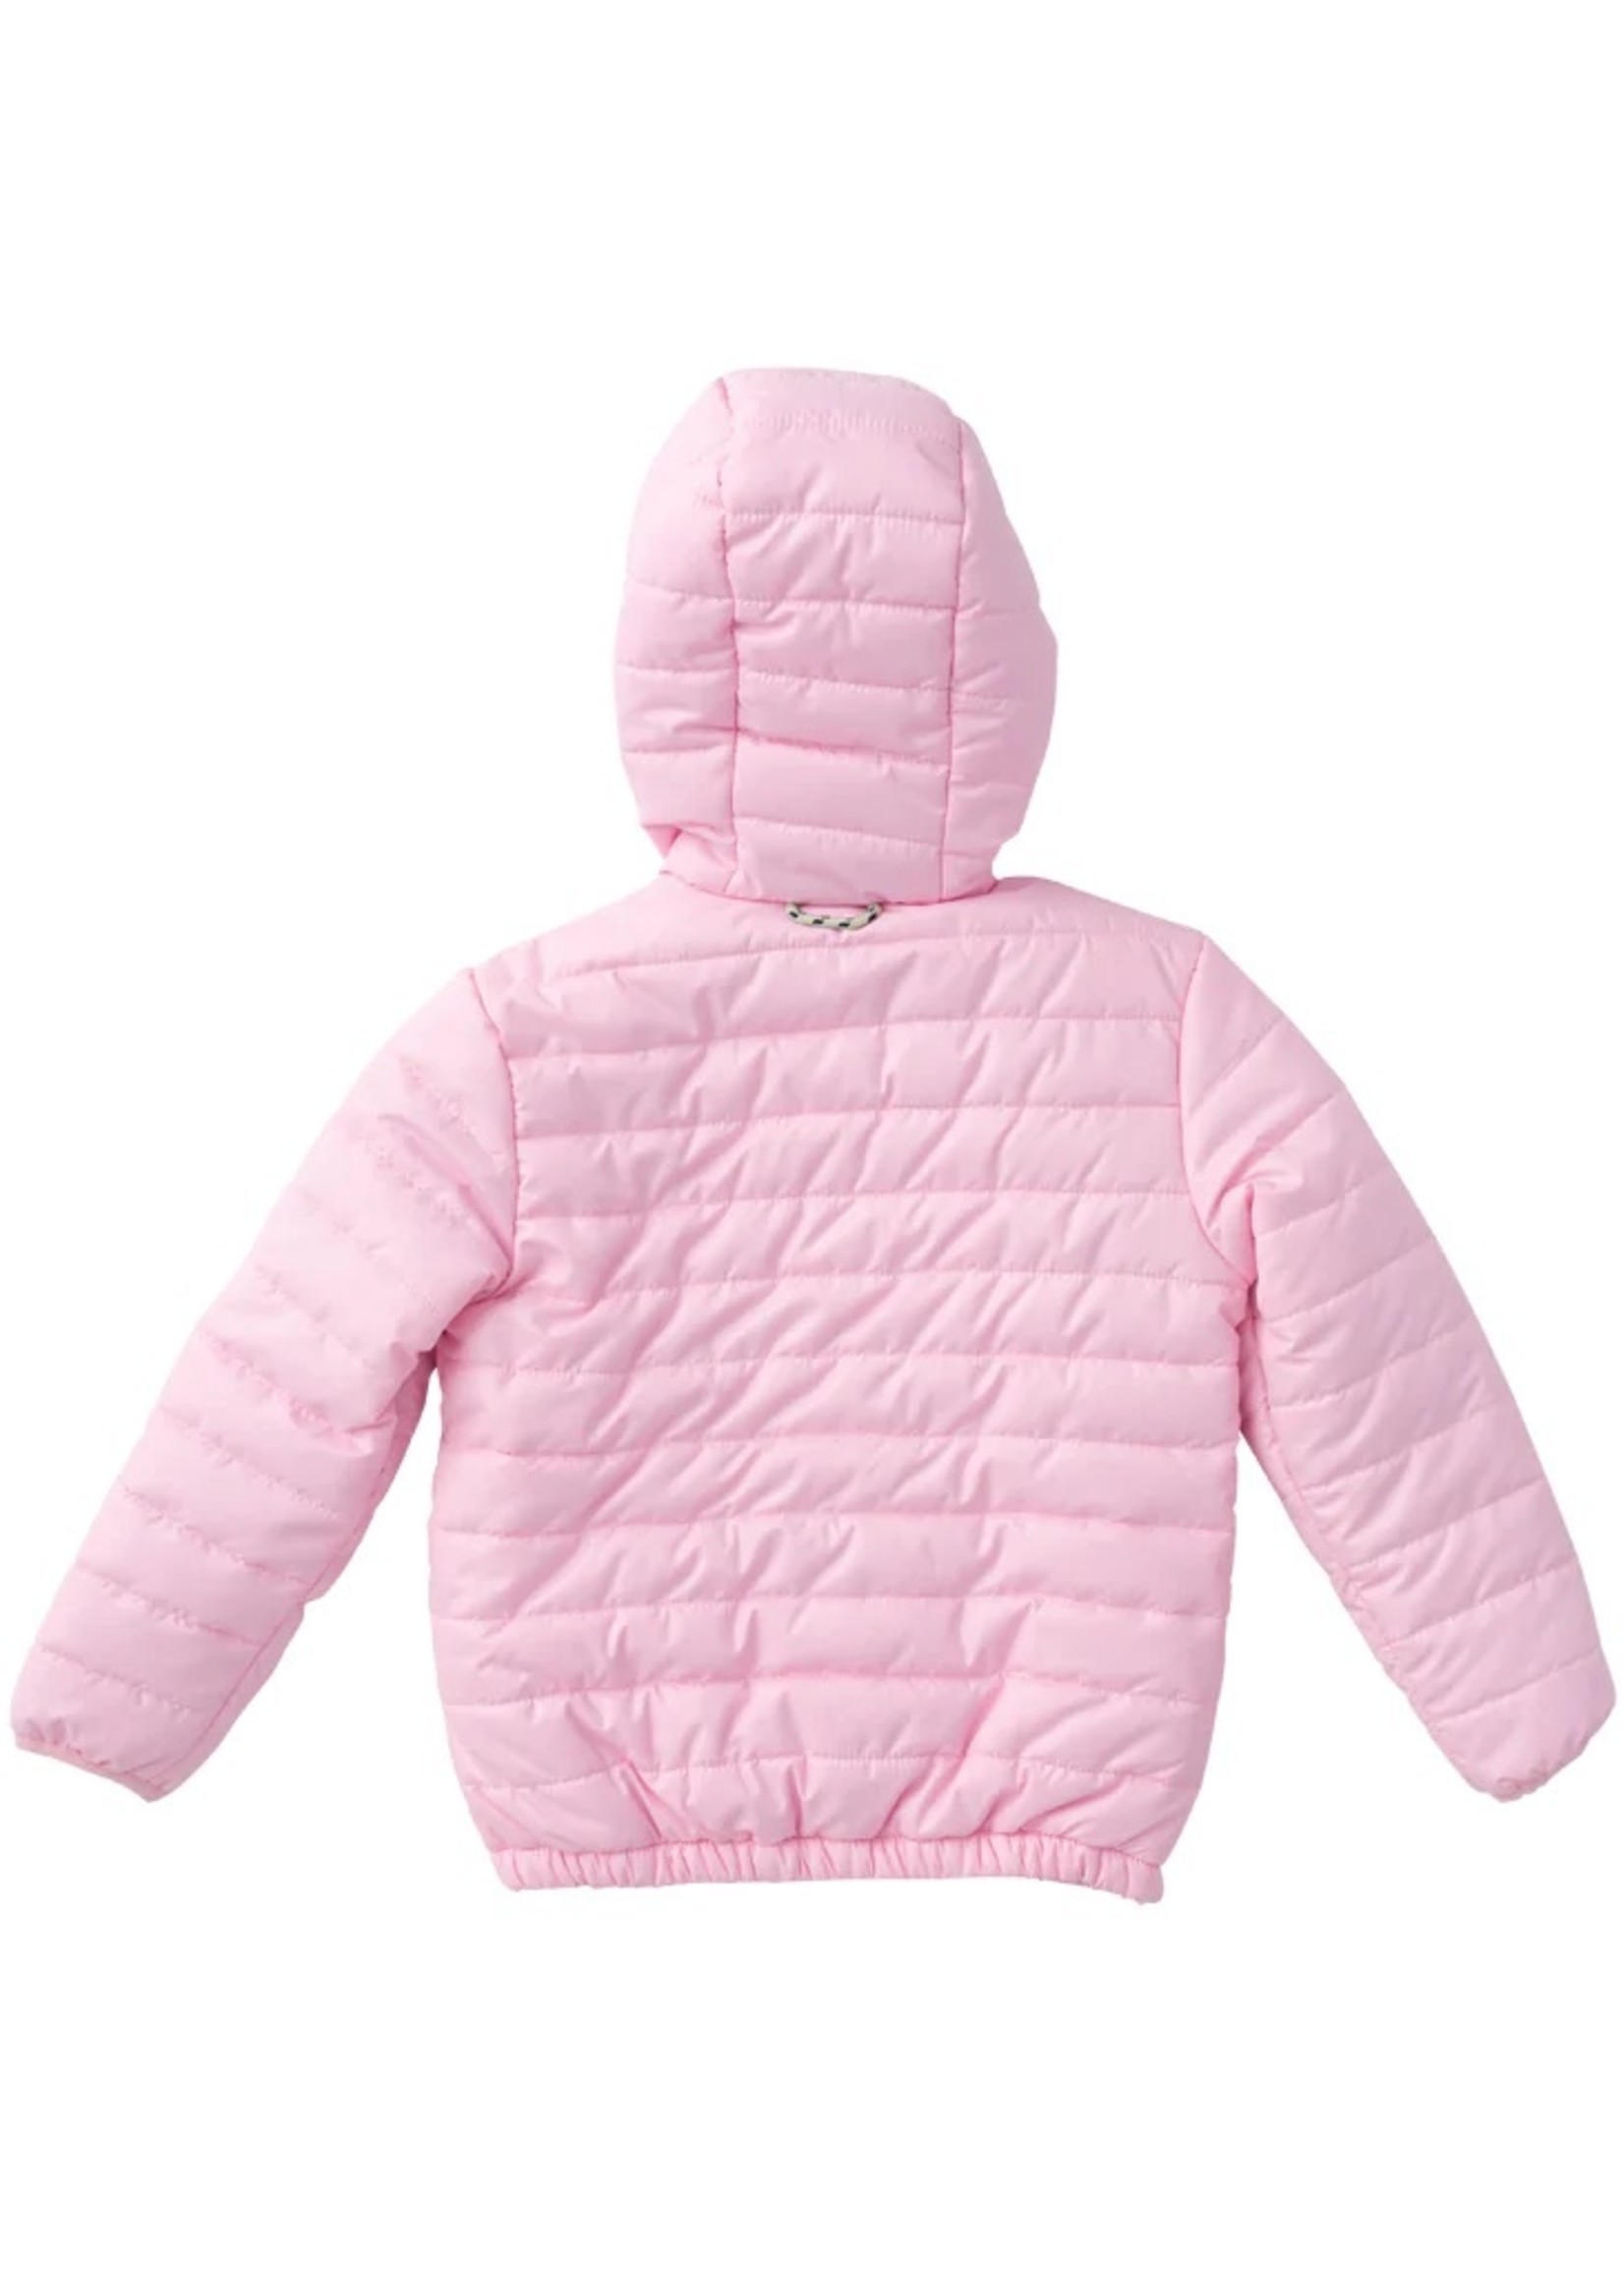 PINK LADY HOODED PUFFER JACKET